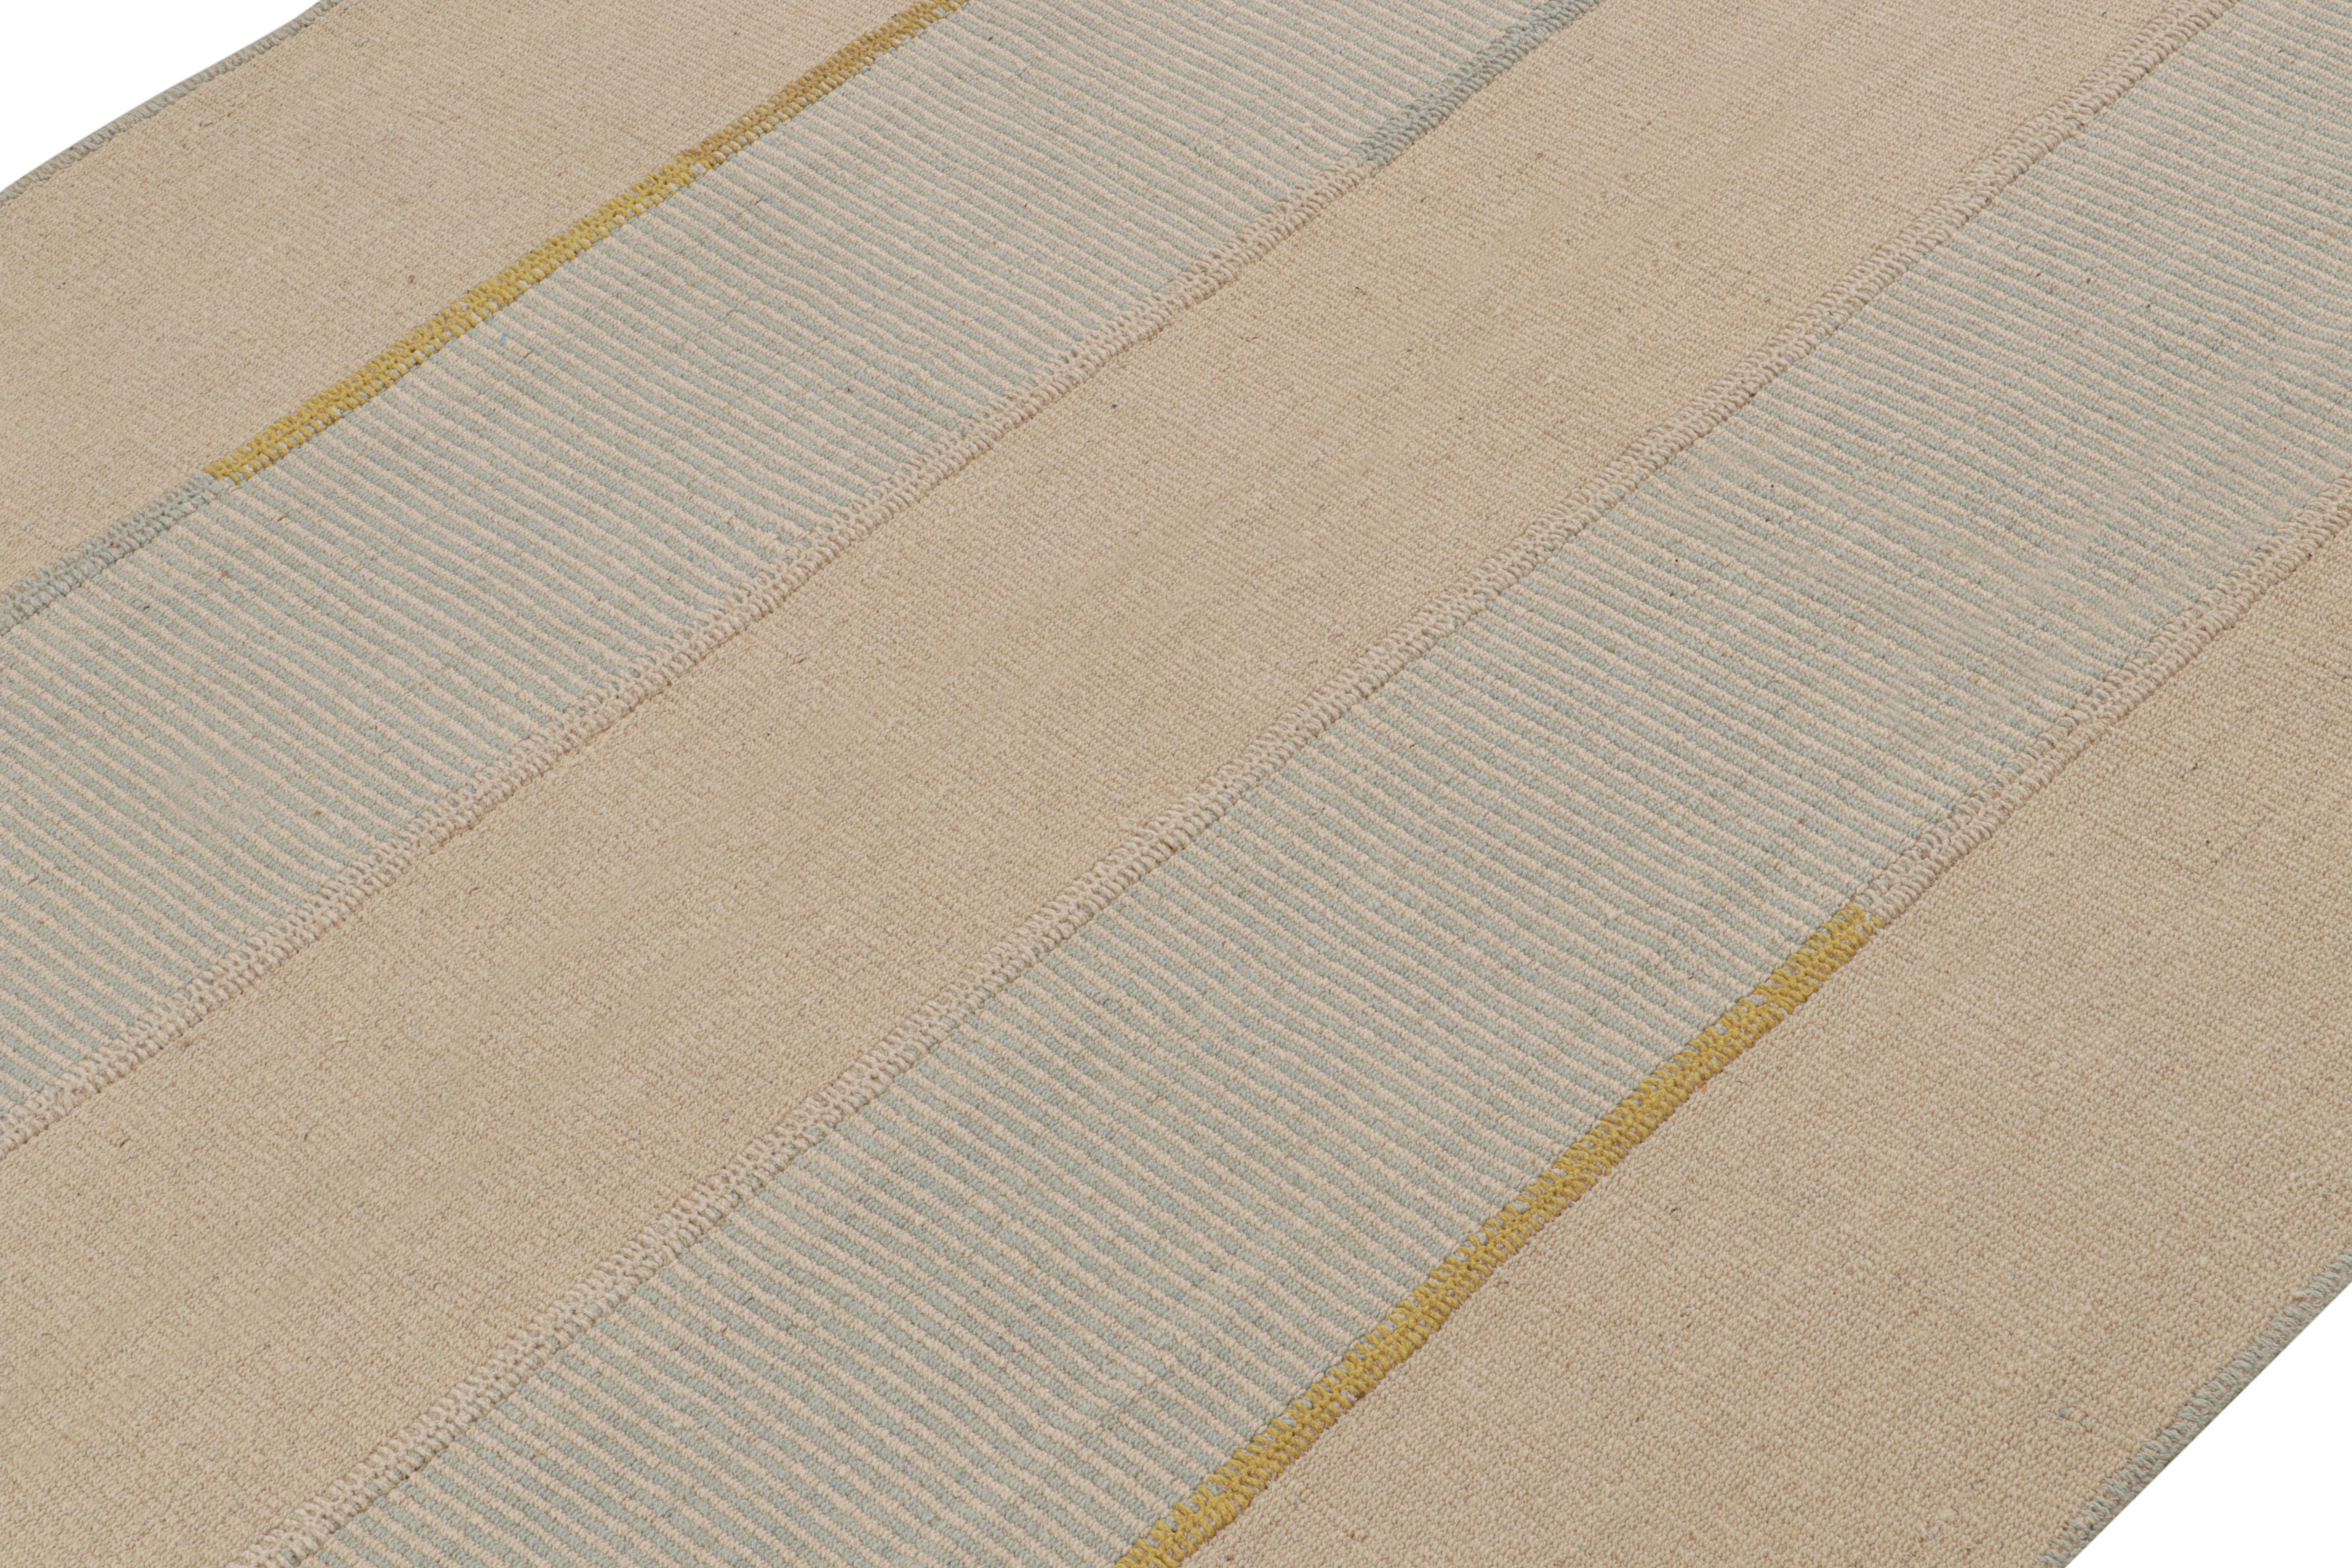 Handwoven in wool, this 7x9 Kilim os from a bold new line of contemporary flatweaves by Rug & Kilim.

On the Design: 

Connoting a modern take on Classic panel-weaving, our latest “Rez Kilim” enjoys beige, blue and gold tones with a cream